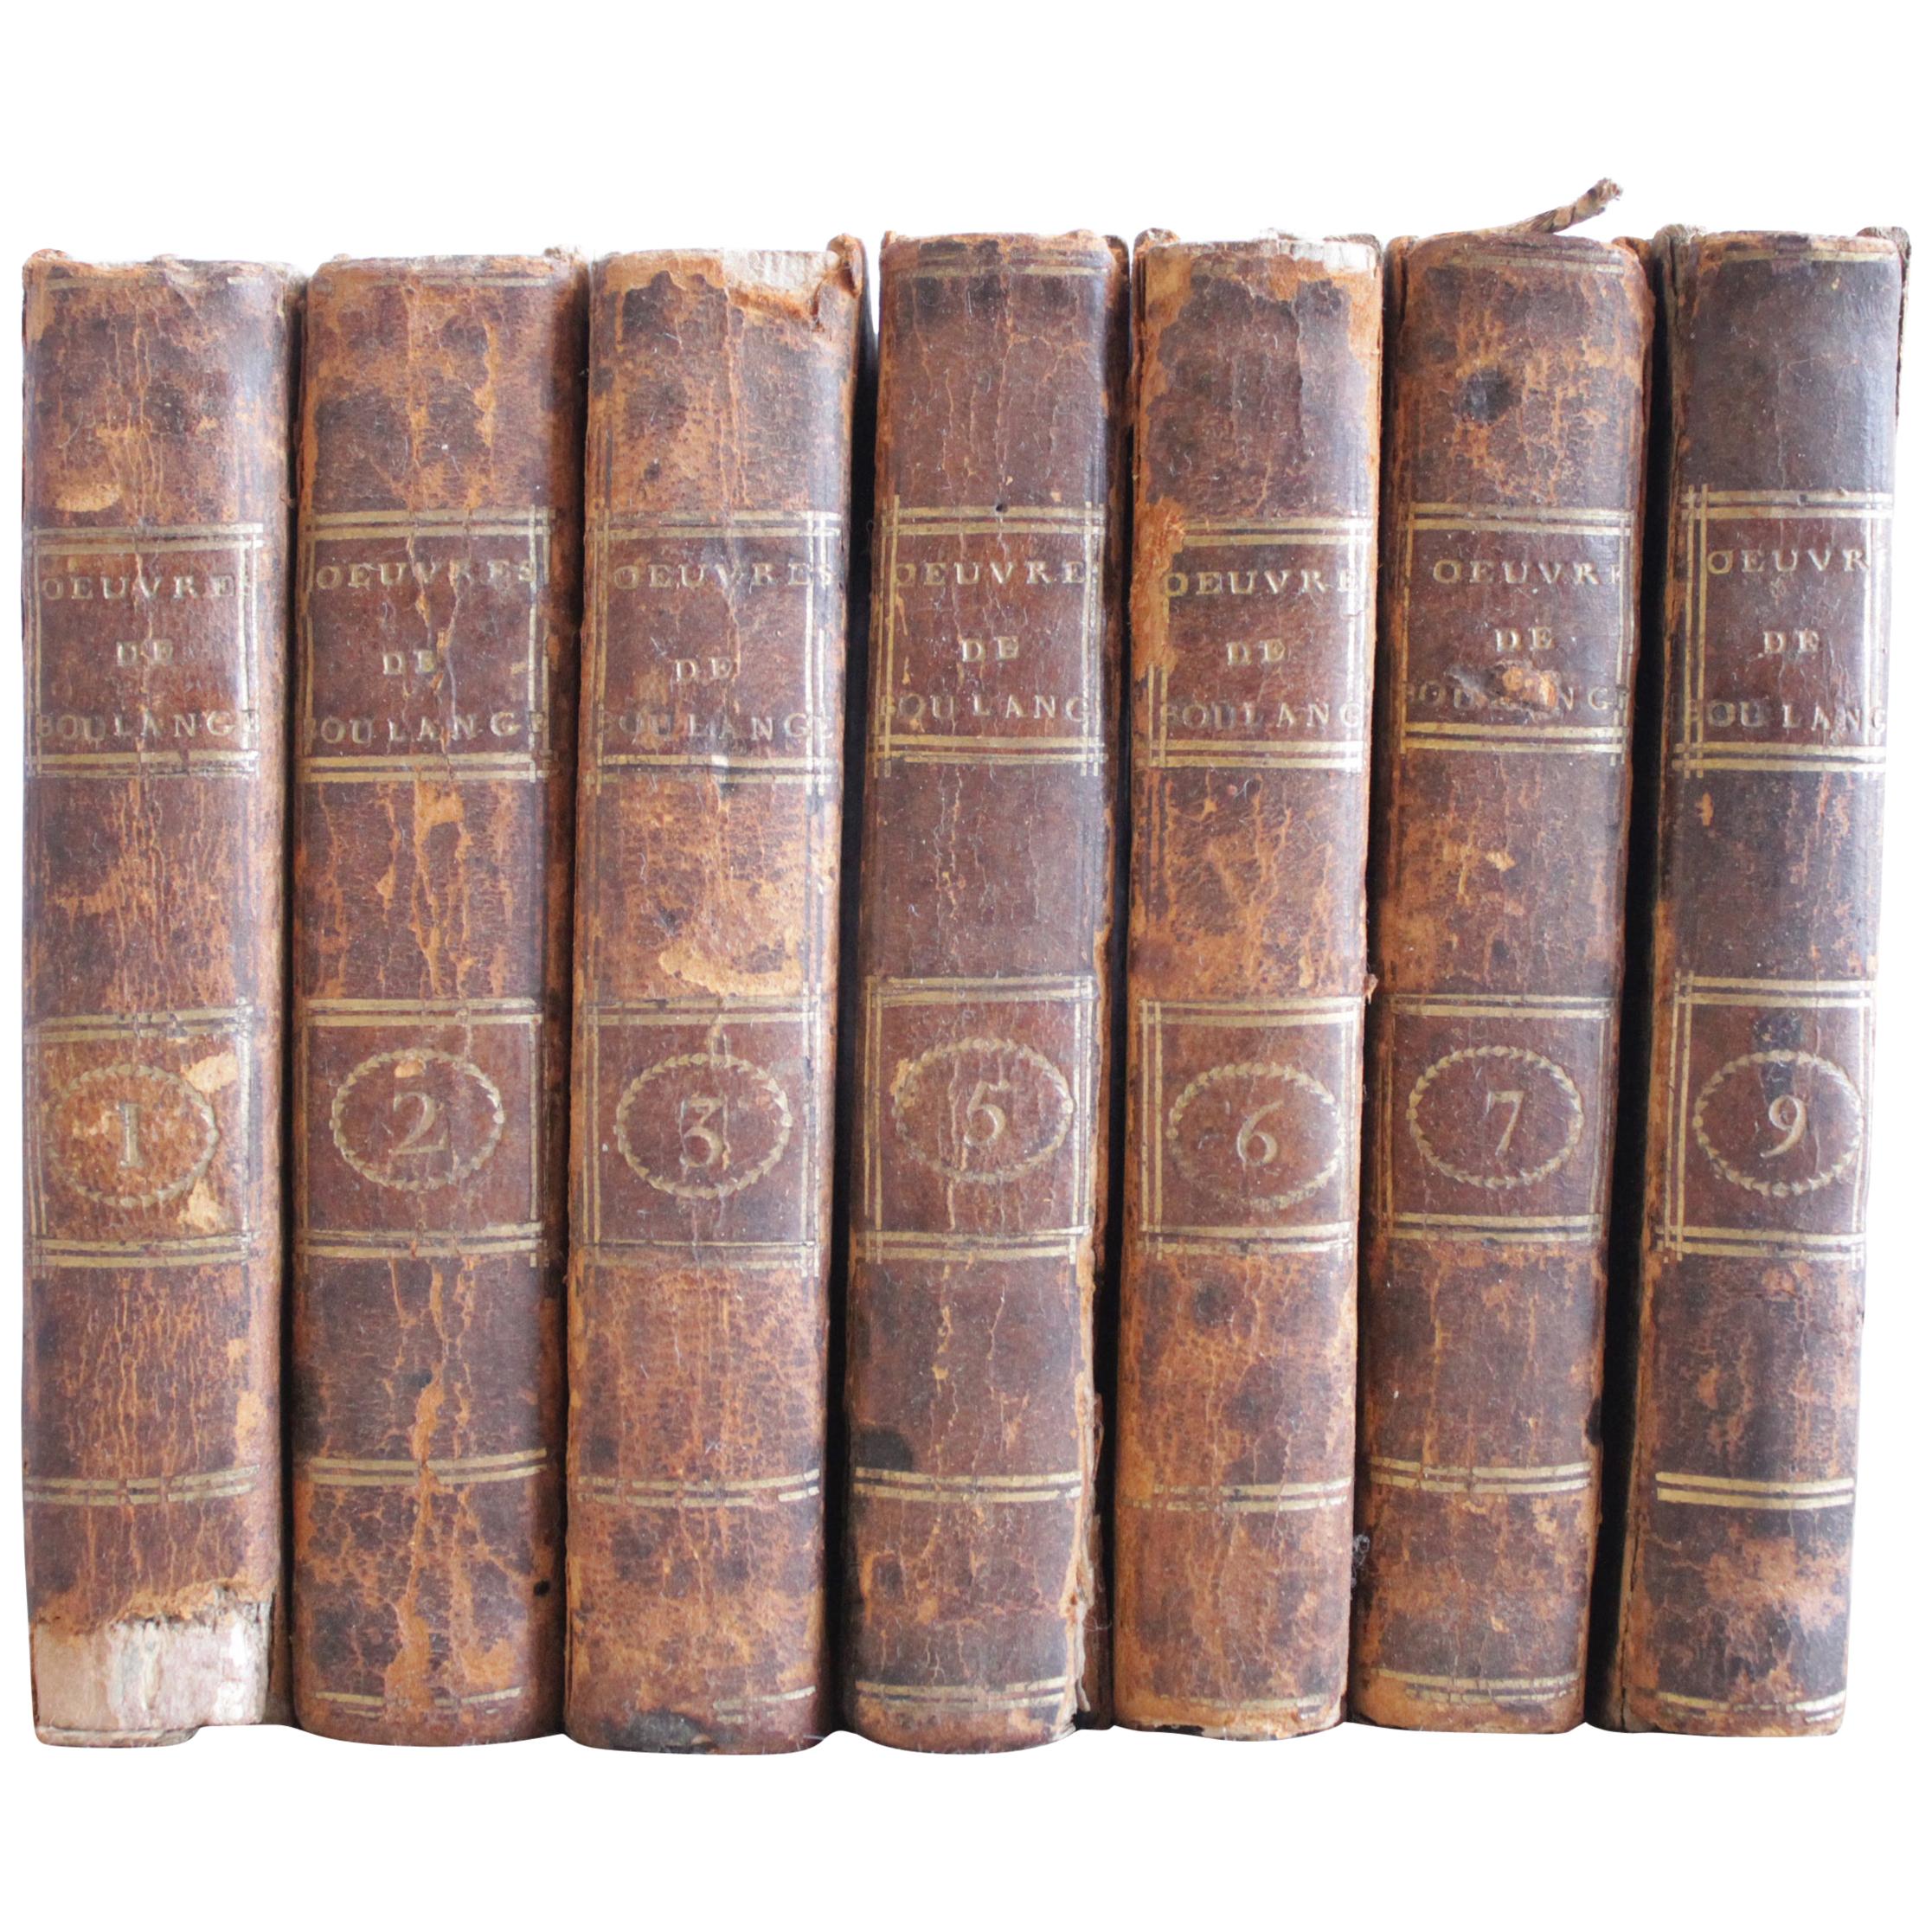 Set of 7 European Leather Bound Books Oeuvre de Oulange